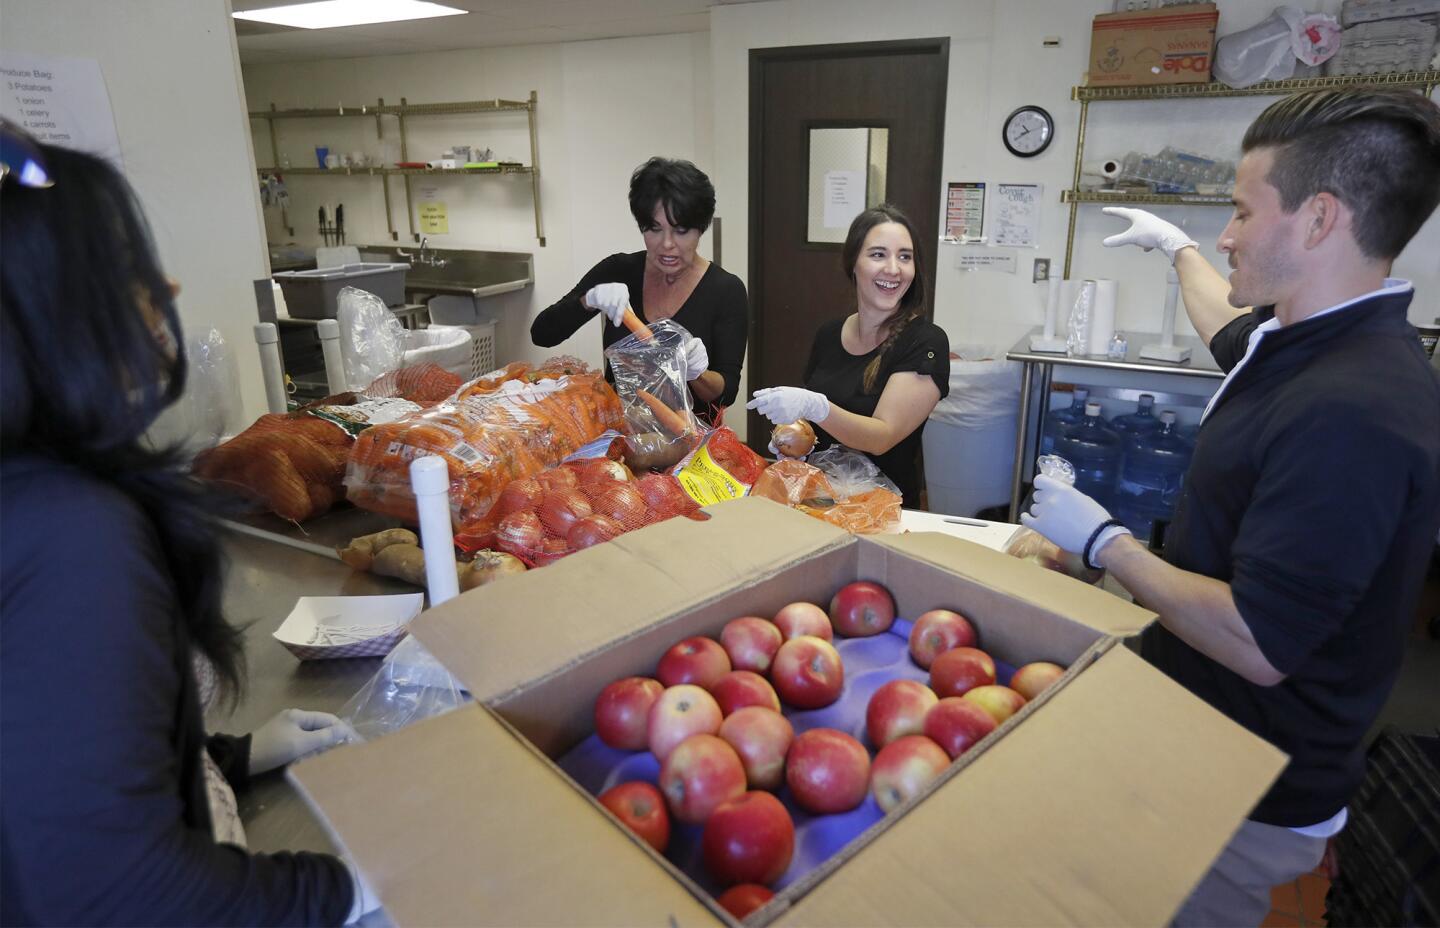 Volunteers Parisa Dehdashti, Denise Fleig, Alejandra Seymour and Brad Morrow, from left, of First Team Real Estate in Newport Beach bag produce to go with Thanksgiving food bags at Share Our Selves in Costa Mesa on Tuesday.